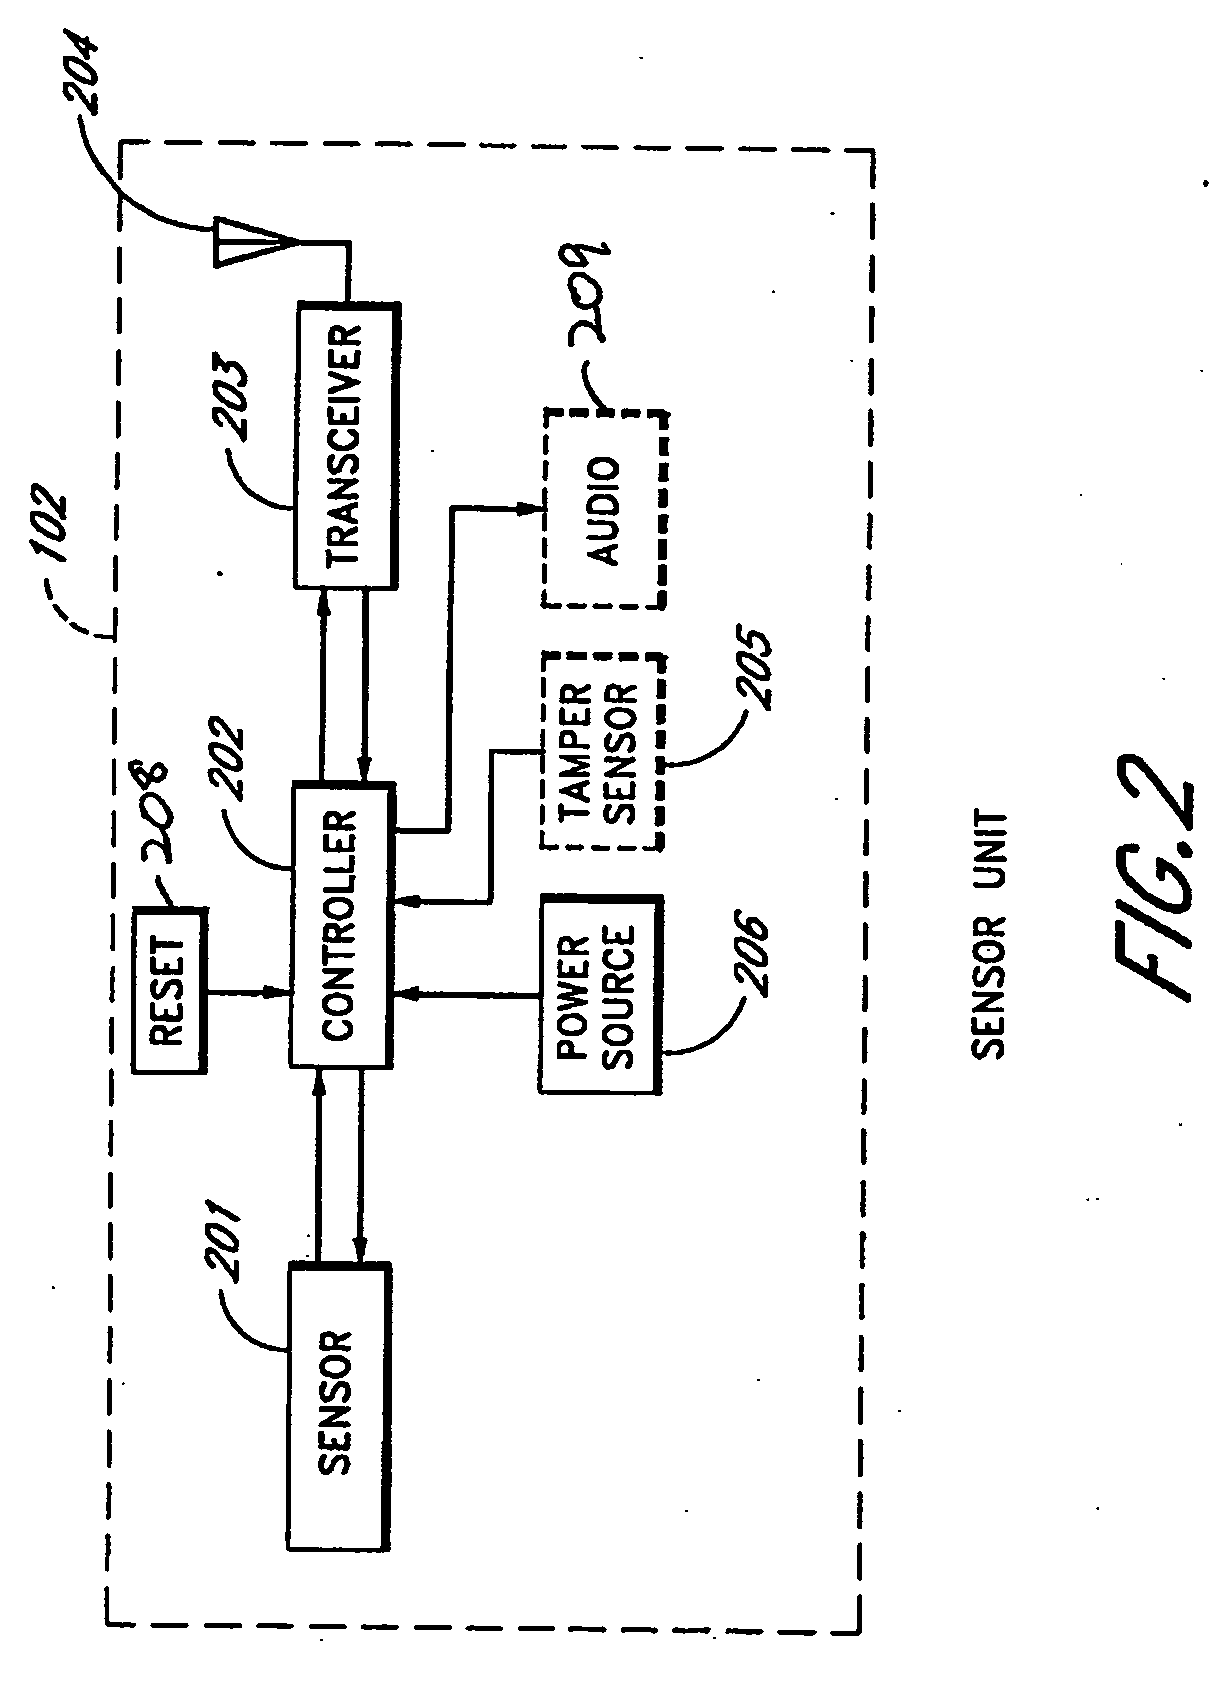 Method and apparatus for detecting conditions favorable for growth of fungus